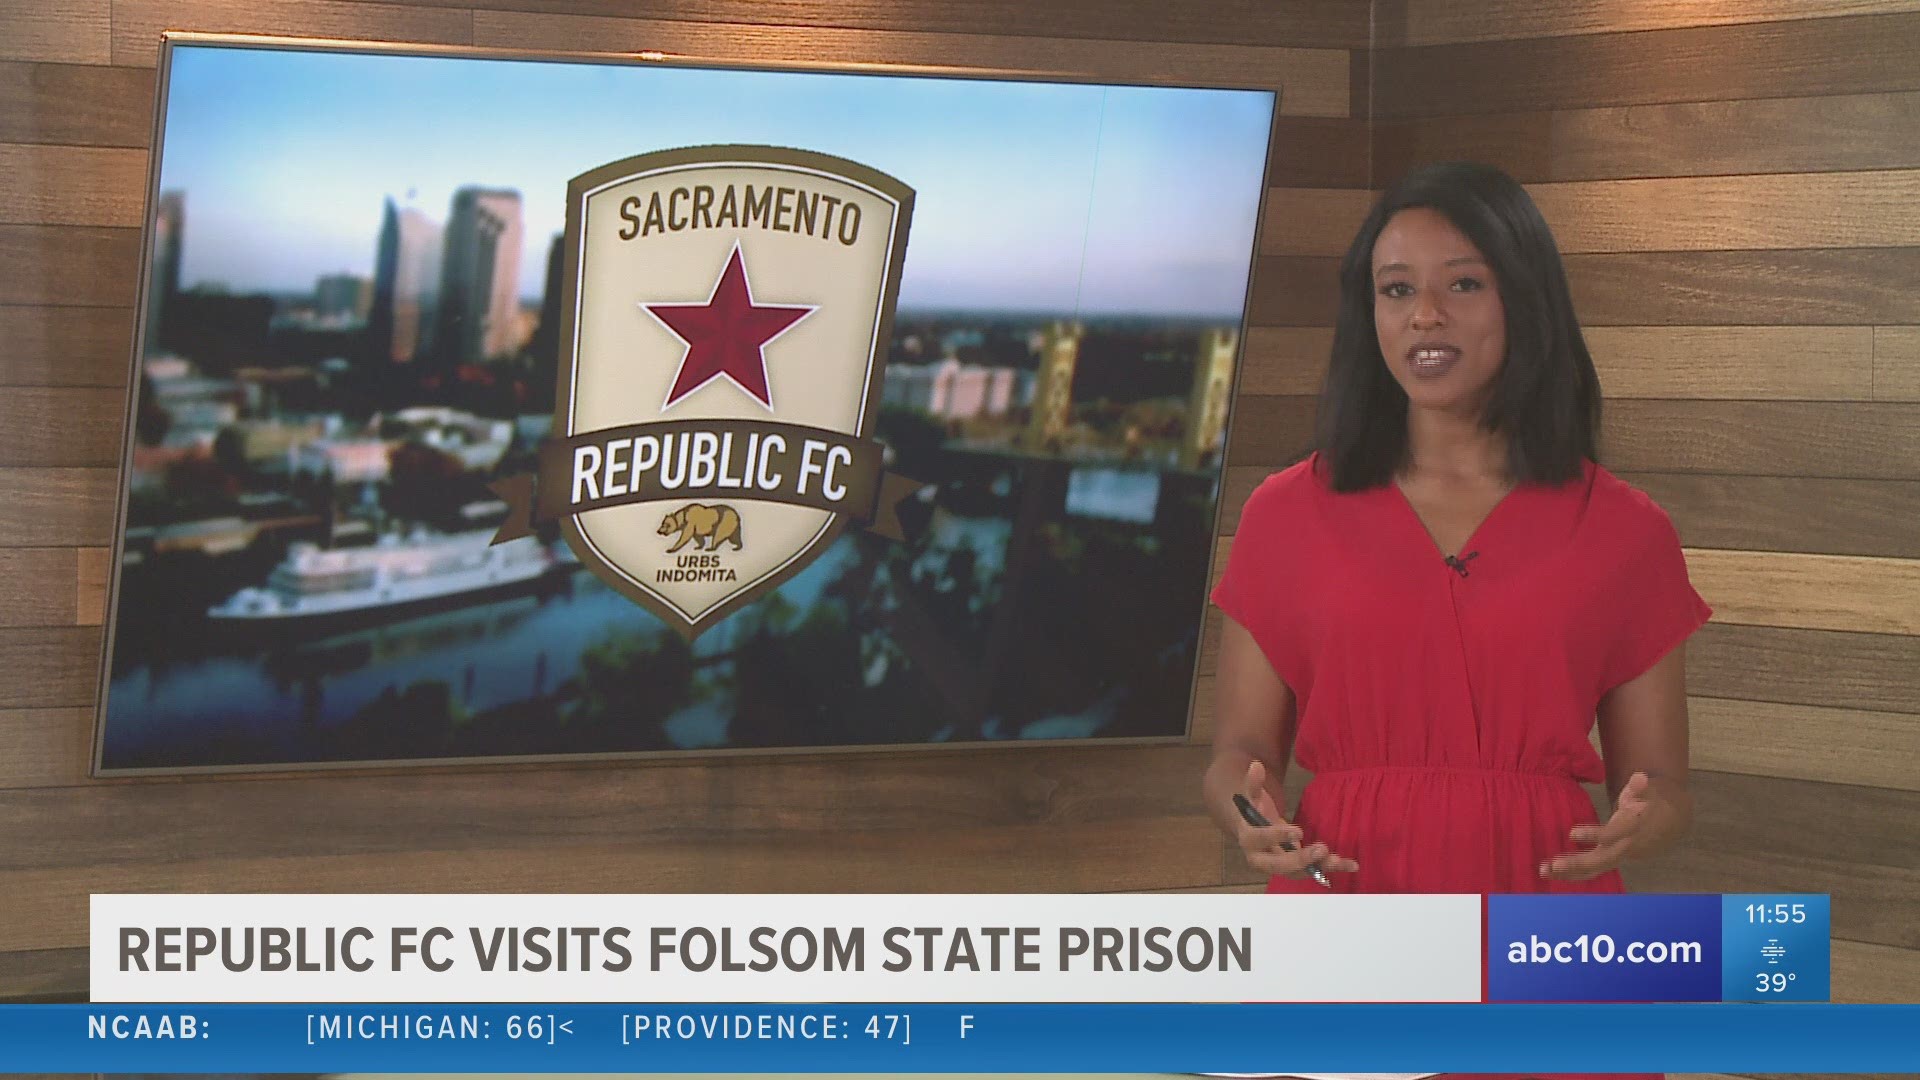 ABC10's Lina Washington takes us inside Folsom State Prison with Sacramento Republic FC for its monthly pick-up game with inmates.